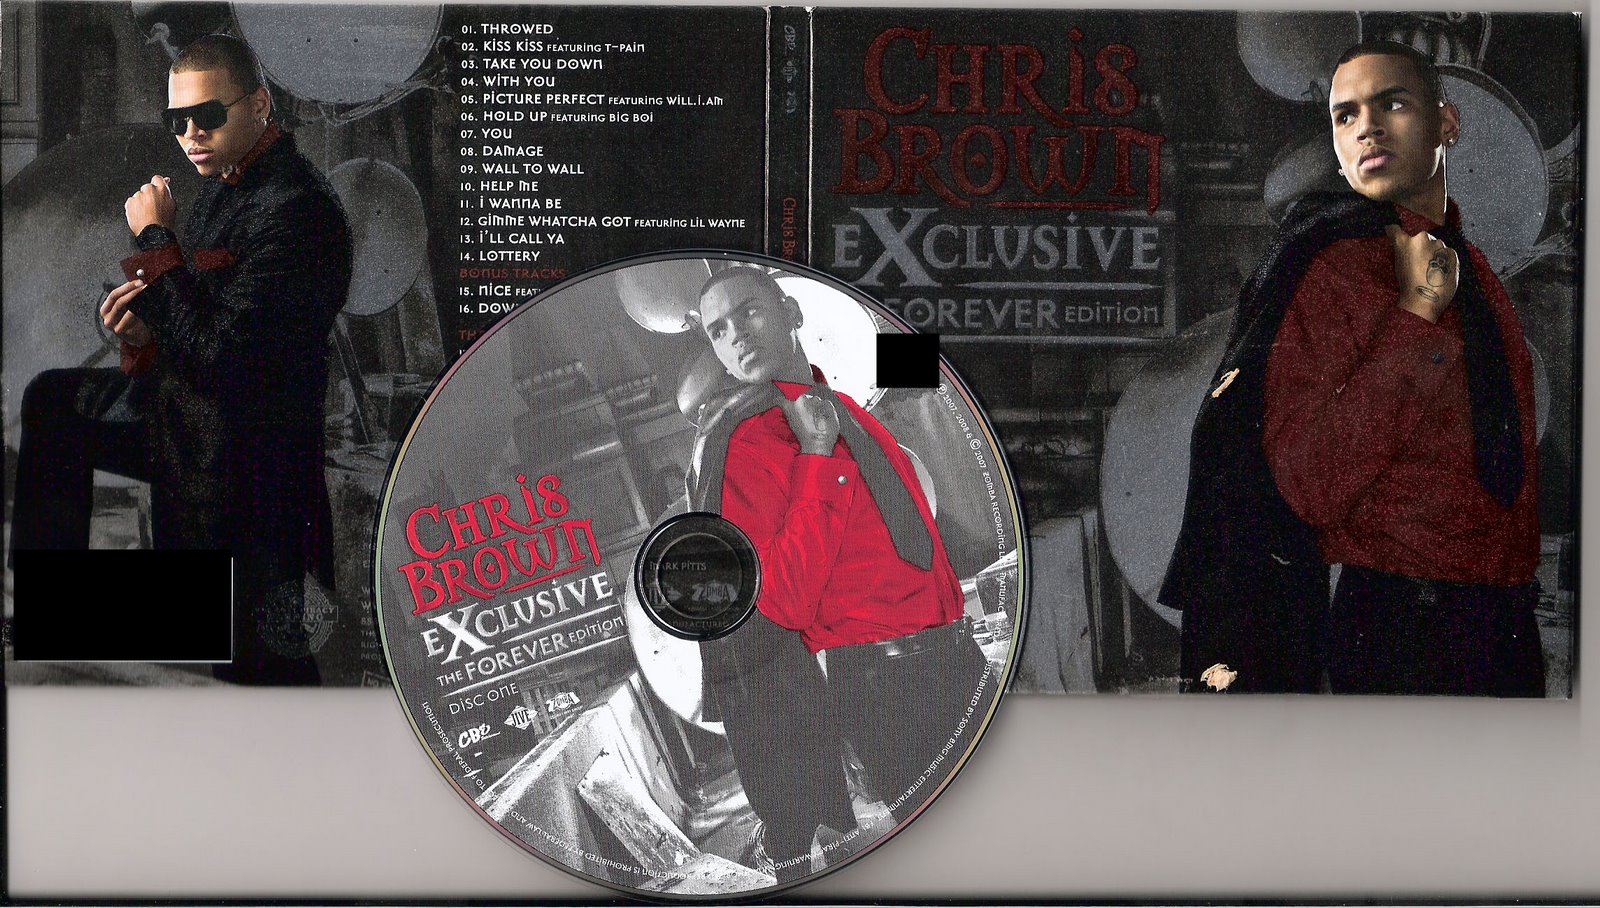 [Chris_Brown-Exclusive_The_Forever_Edition-2008-.jpg]